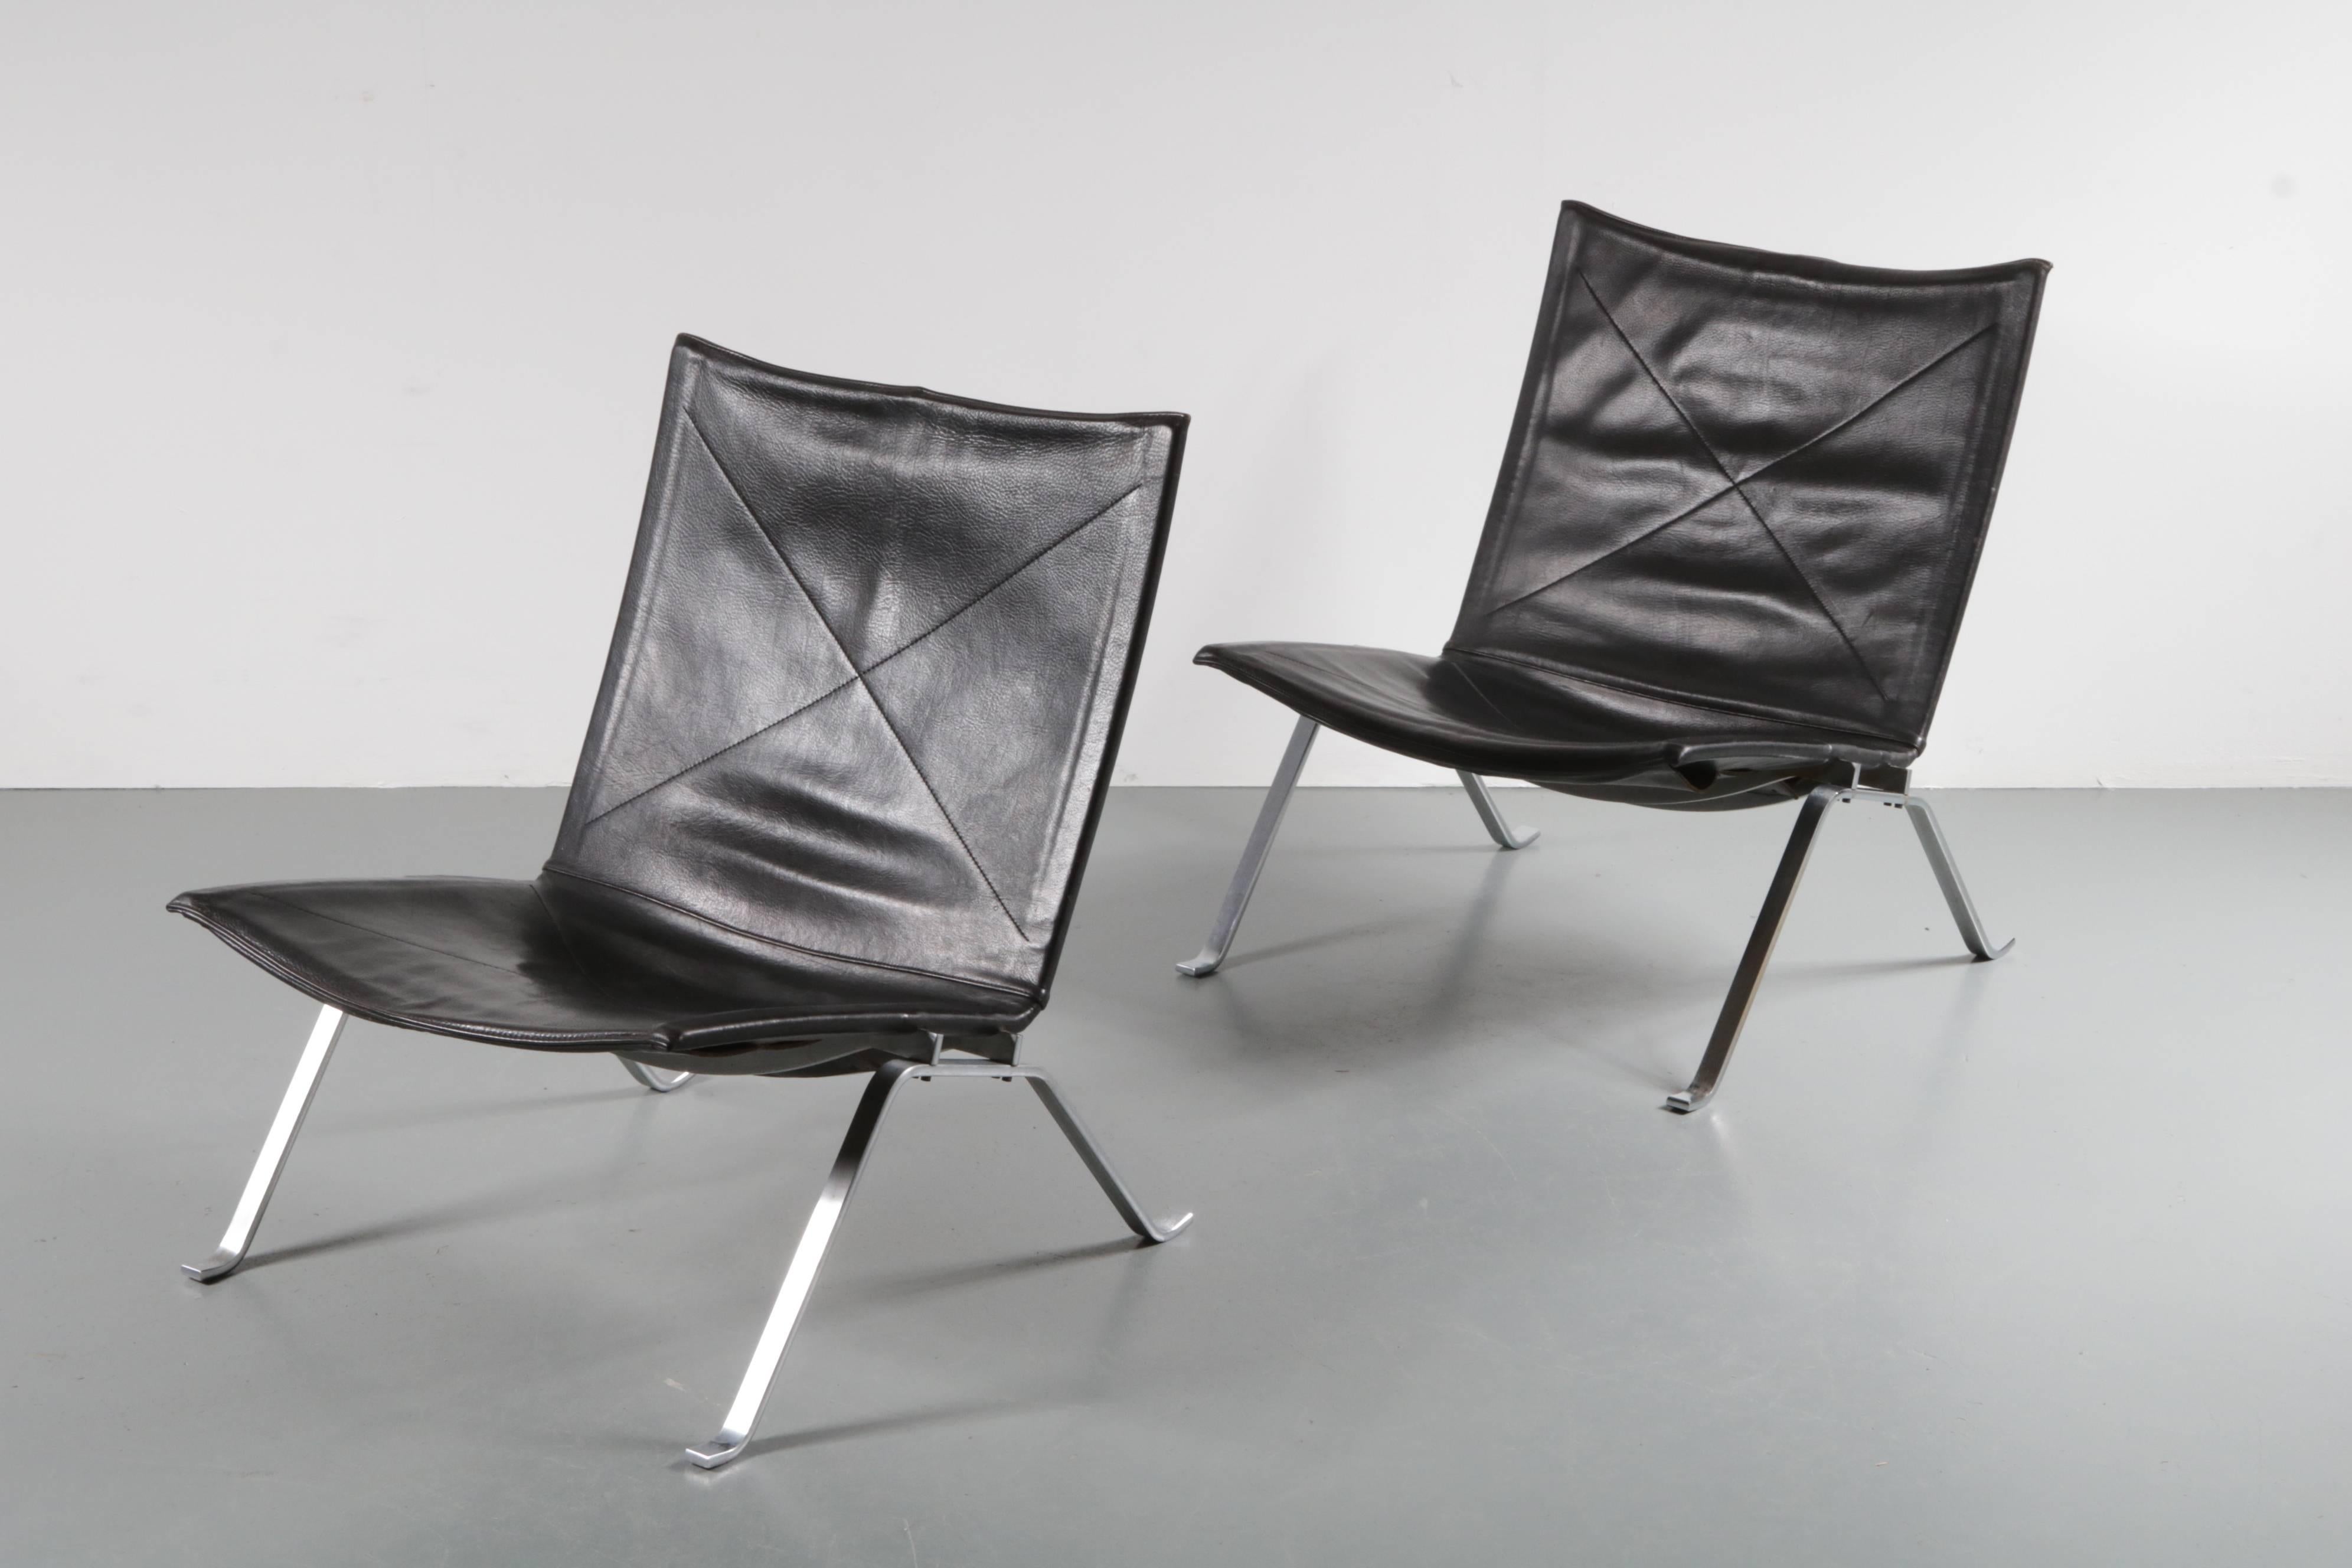 A stunning set of two PK22 lounge chairs, designed by Poul Kjaerholm, manufactured by E. Kold Christensen in Denmark, circa 1960.

The chairs have an nrsuyigul chrome-plated metal base. They are upholstered in heavy quality thick saddle leather.